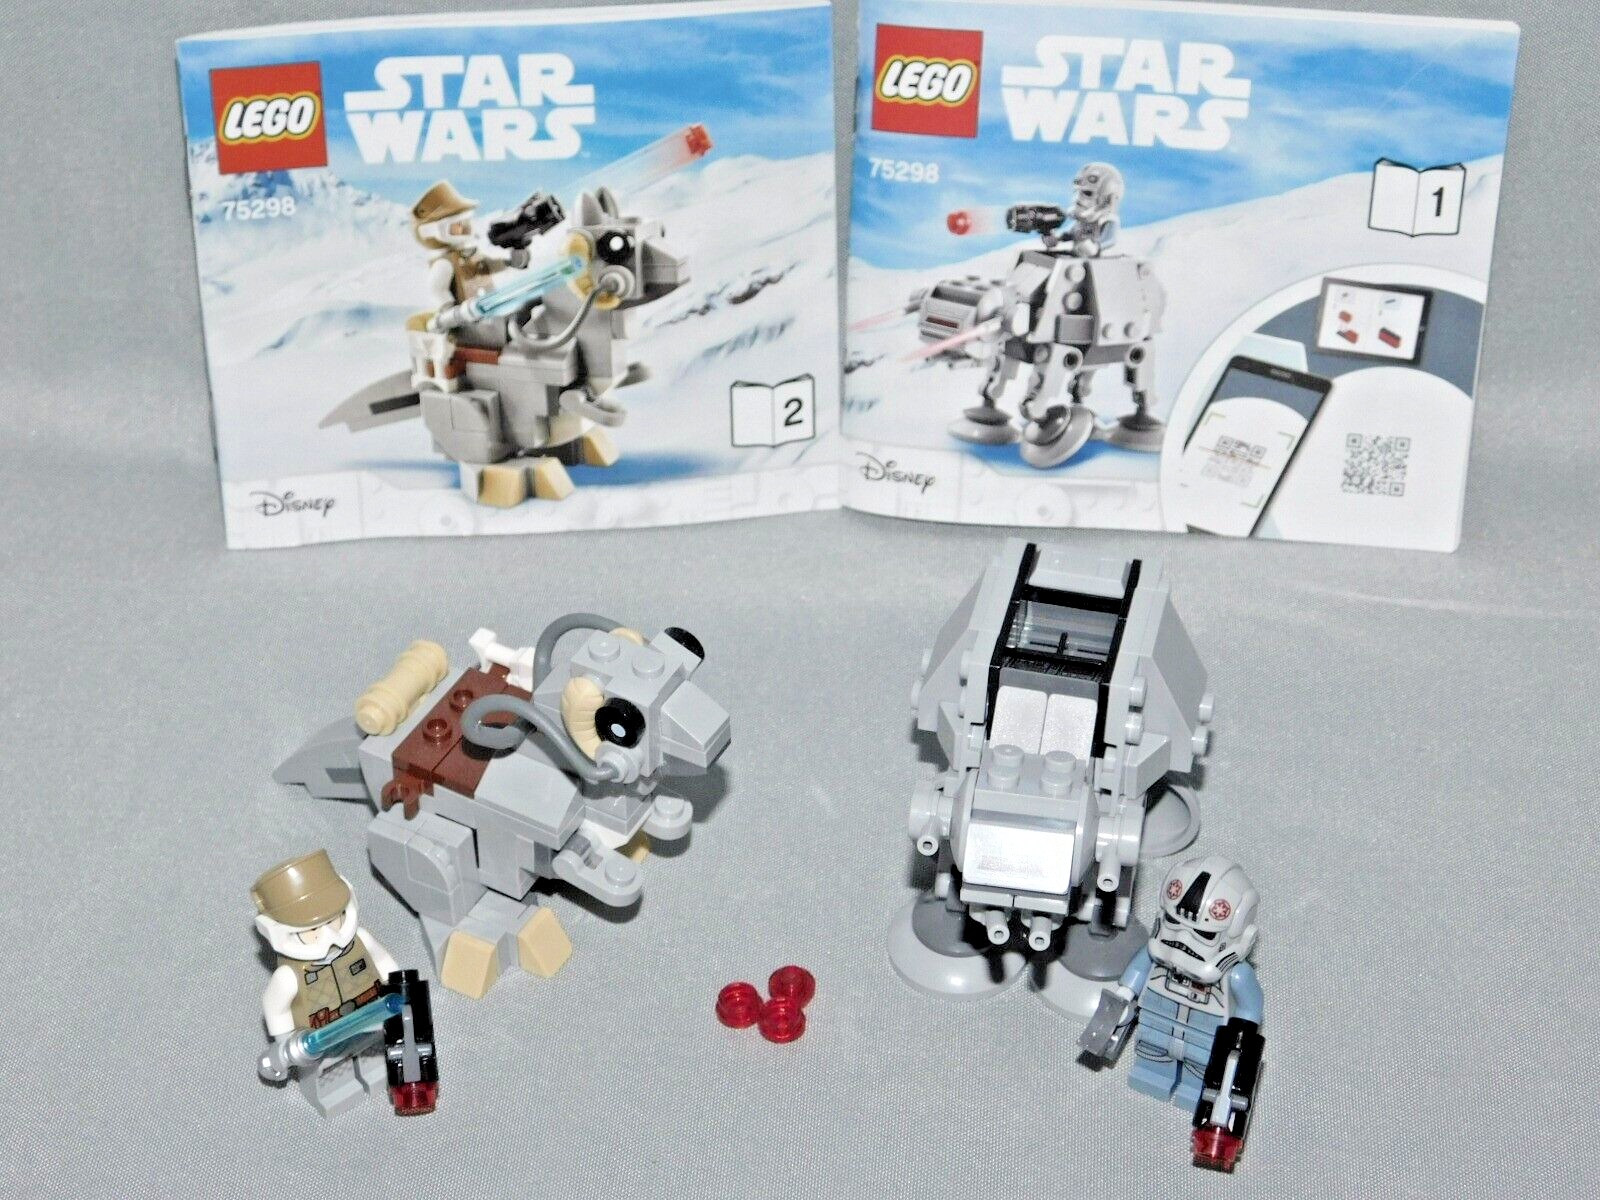 LEGO Star Wars 75298 AT-AT vs. Tauntaun Microfigher w Minifigures & Instructions